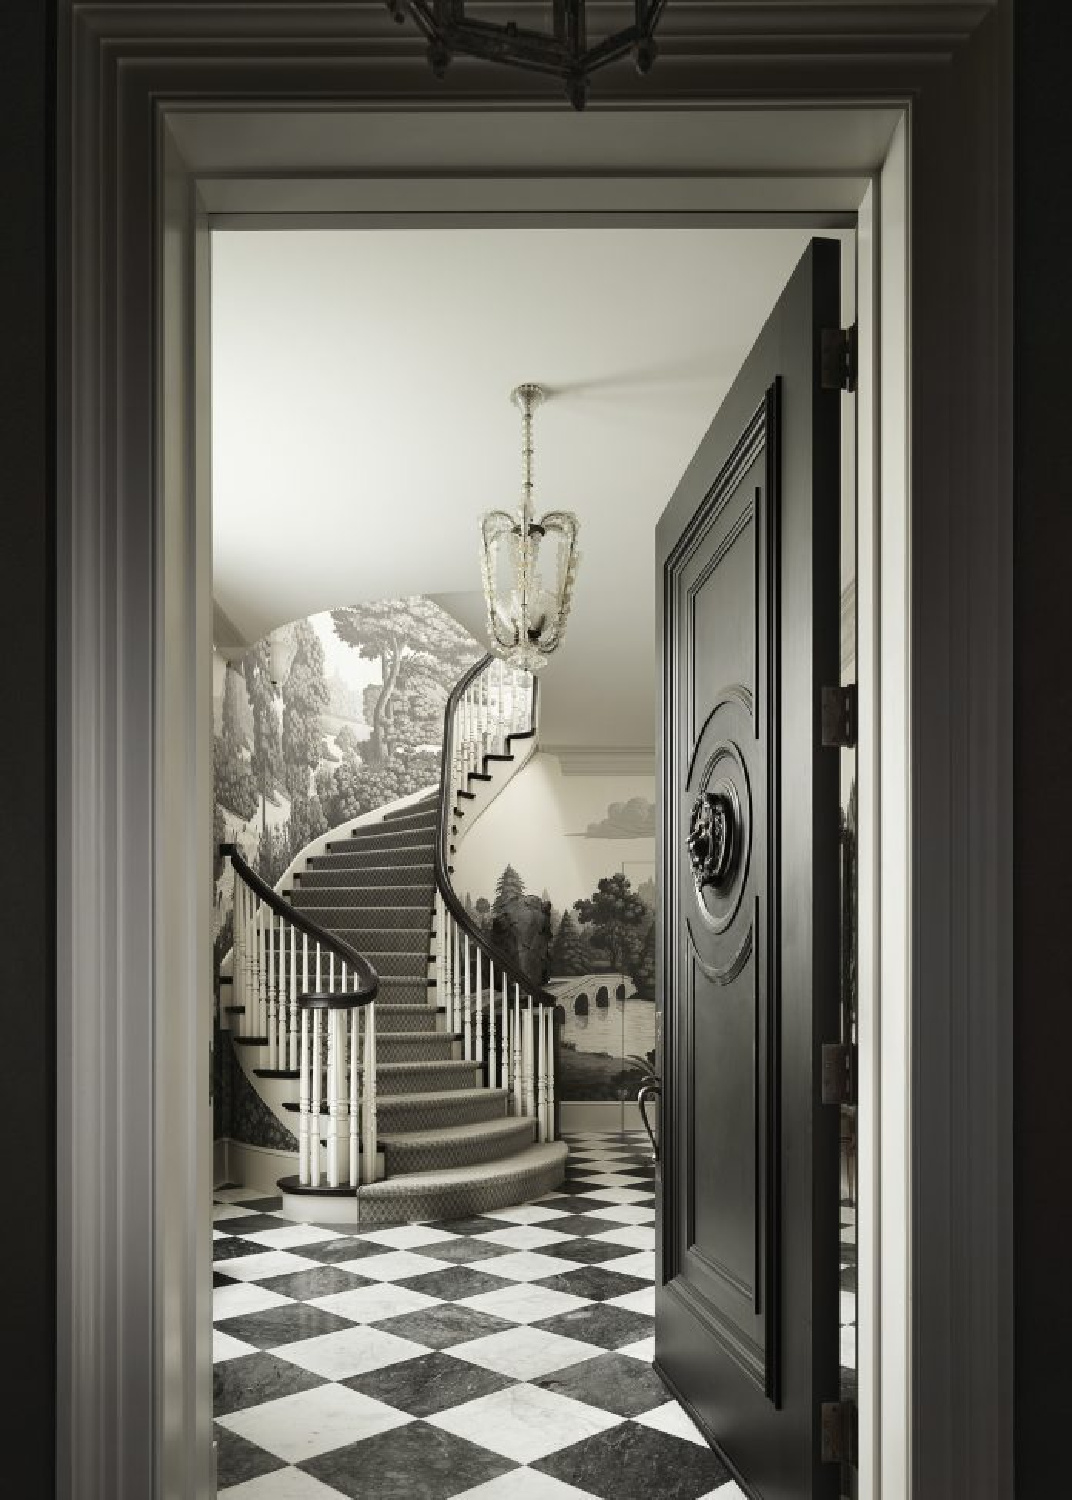 Stunning entry with grisaille landscape DeGournay wallpaper, black and white checkered floors, and design by Fisher Weisman. #grisaillewallpaper #degournaywallpaper #muralwallpaper #checkeredfloors